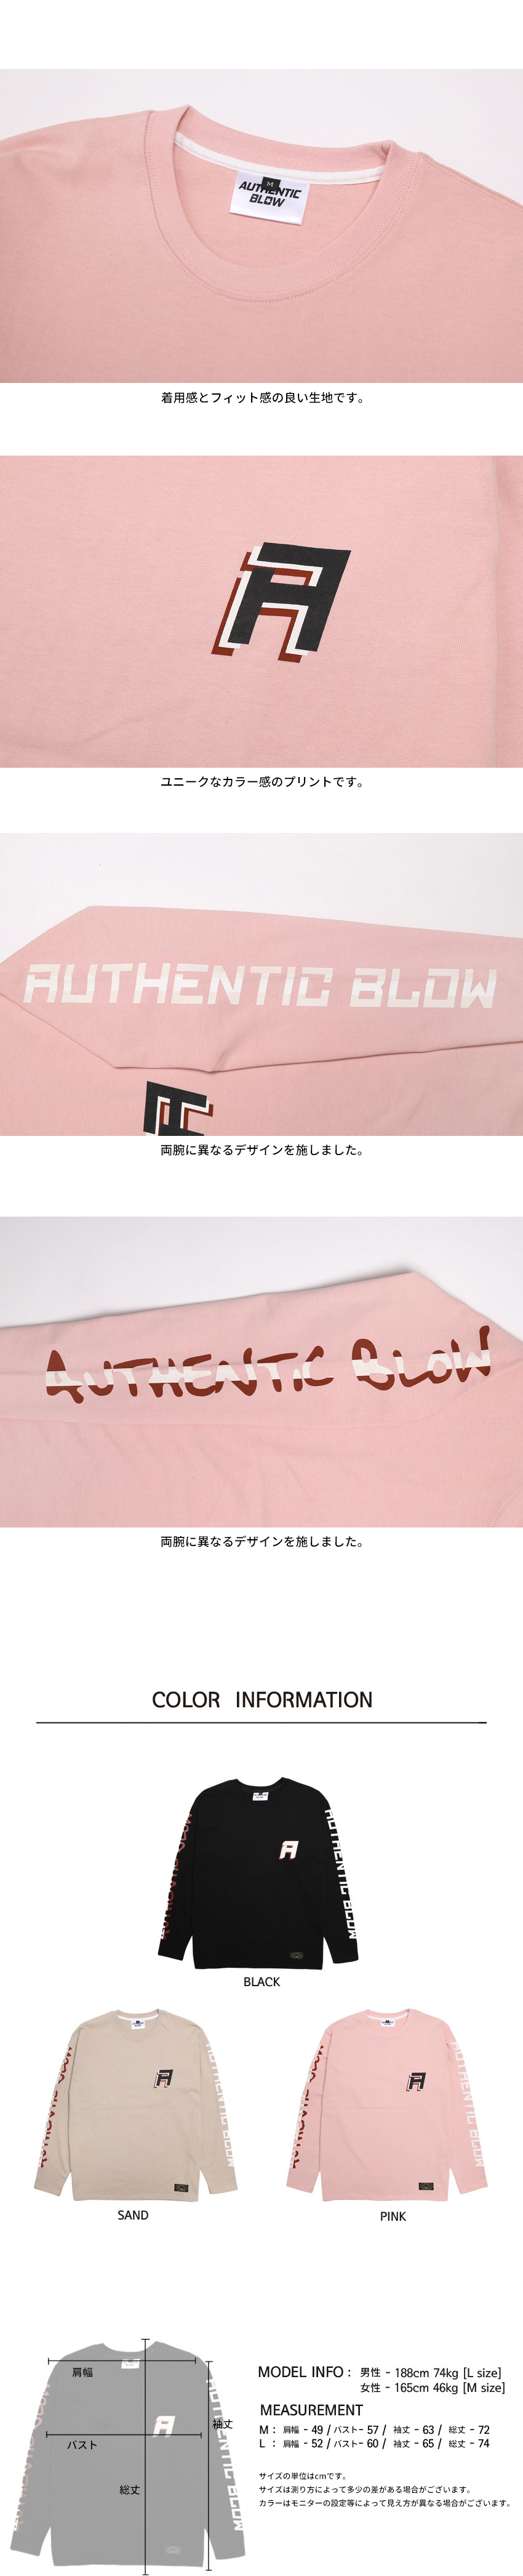 *AUTHENTICBLOW*コラボレーションロングTシャツ(ピンク) | 詳細画像5